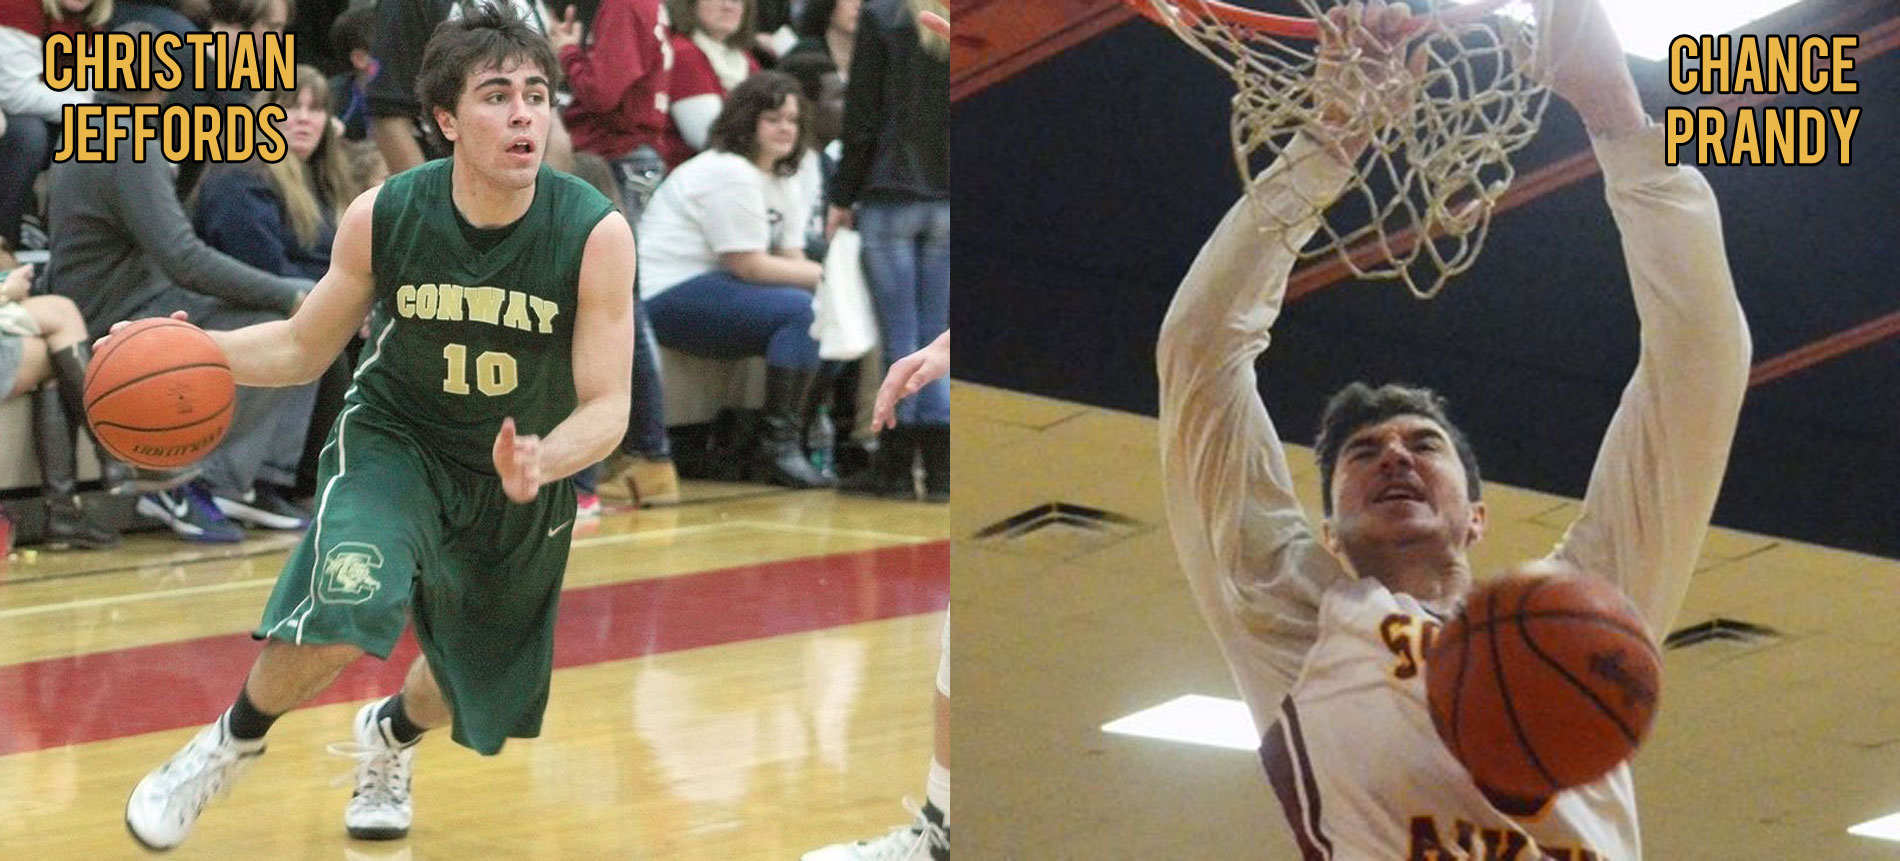 Men’s Basketball Inks Christian Jeffords and Chance Prandy to National Letters of Intent